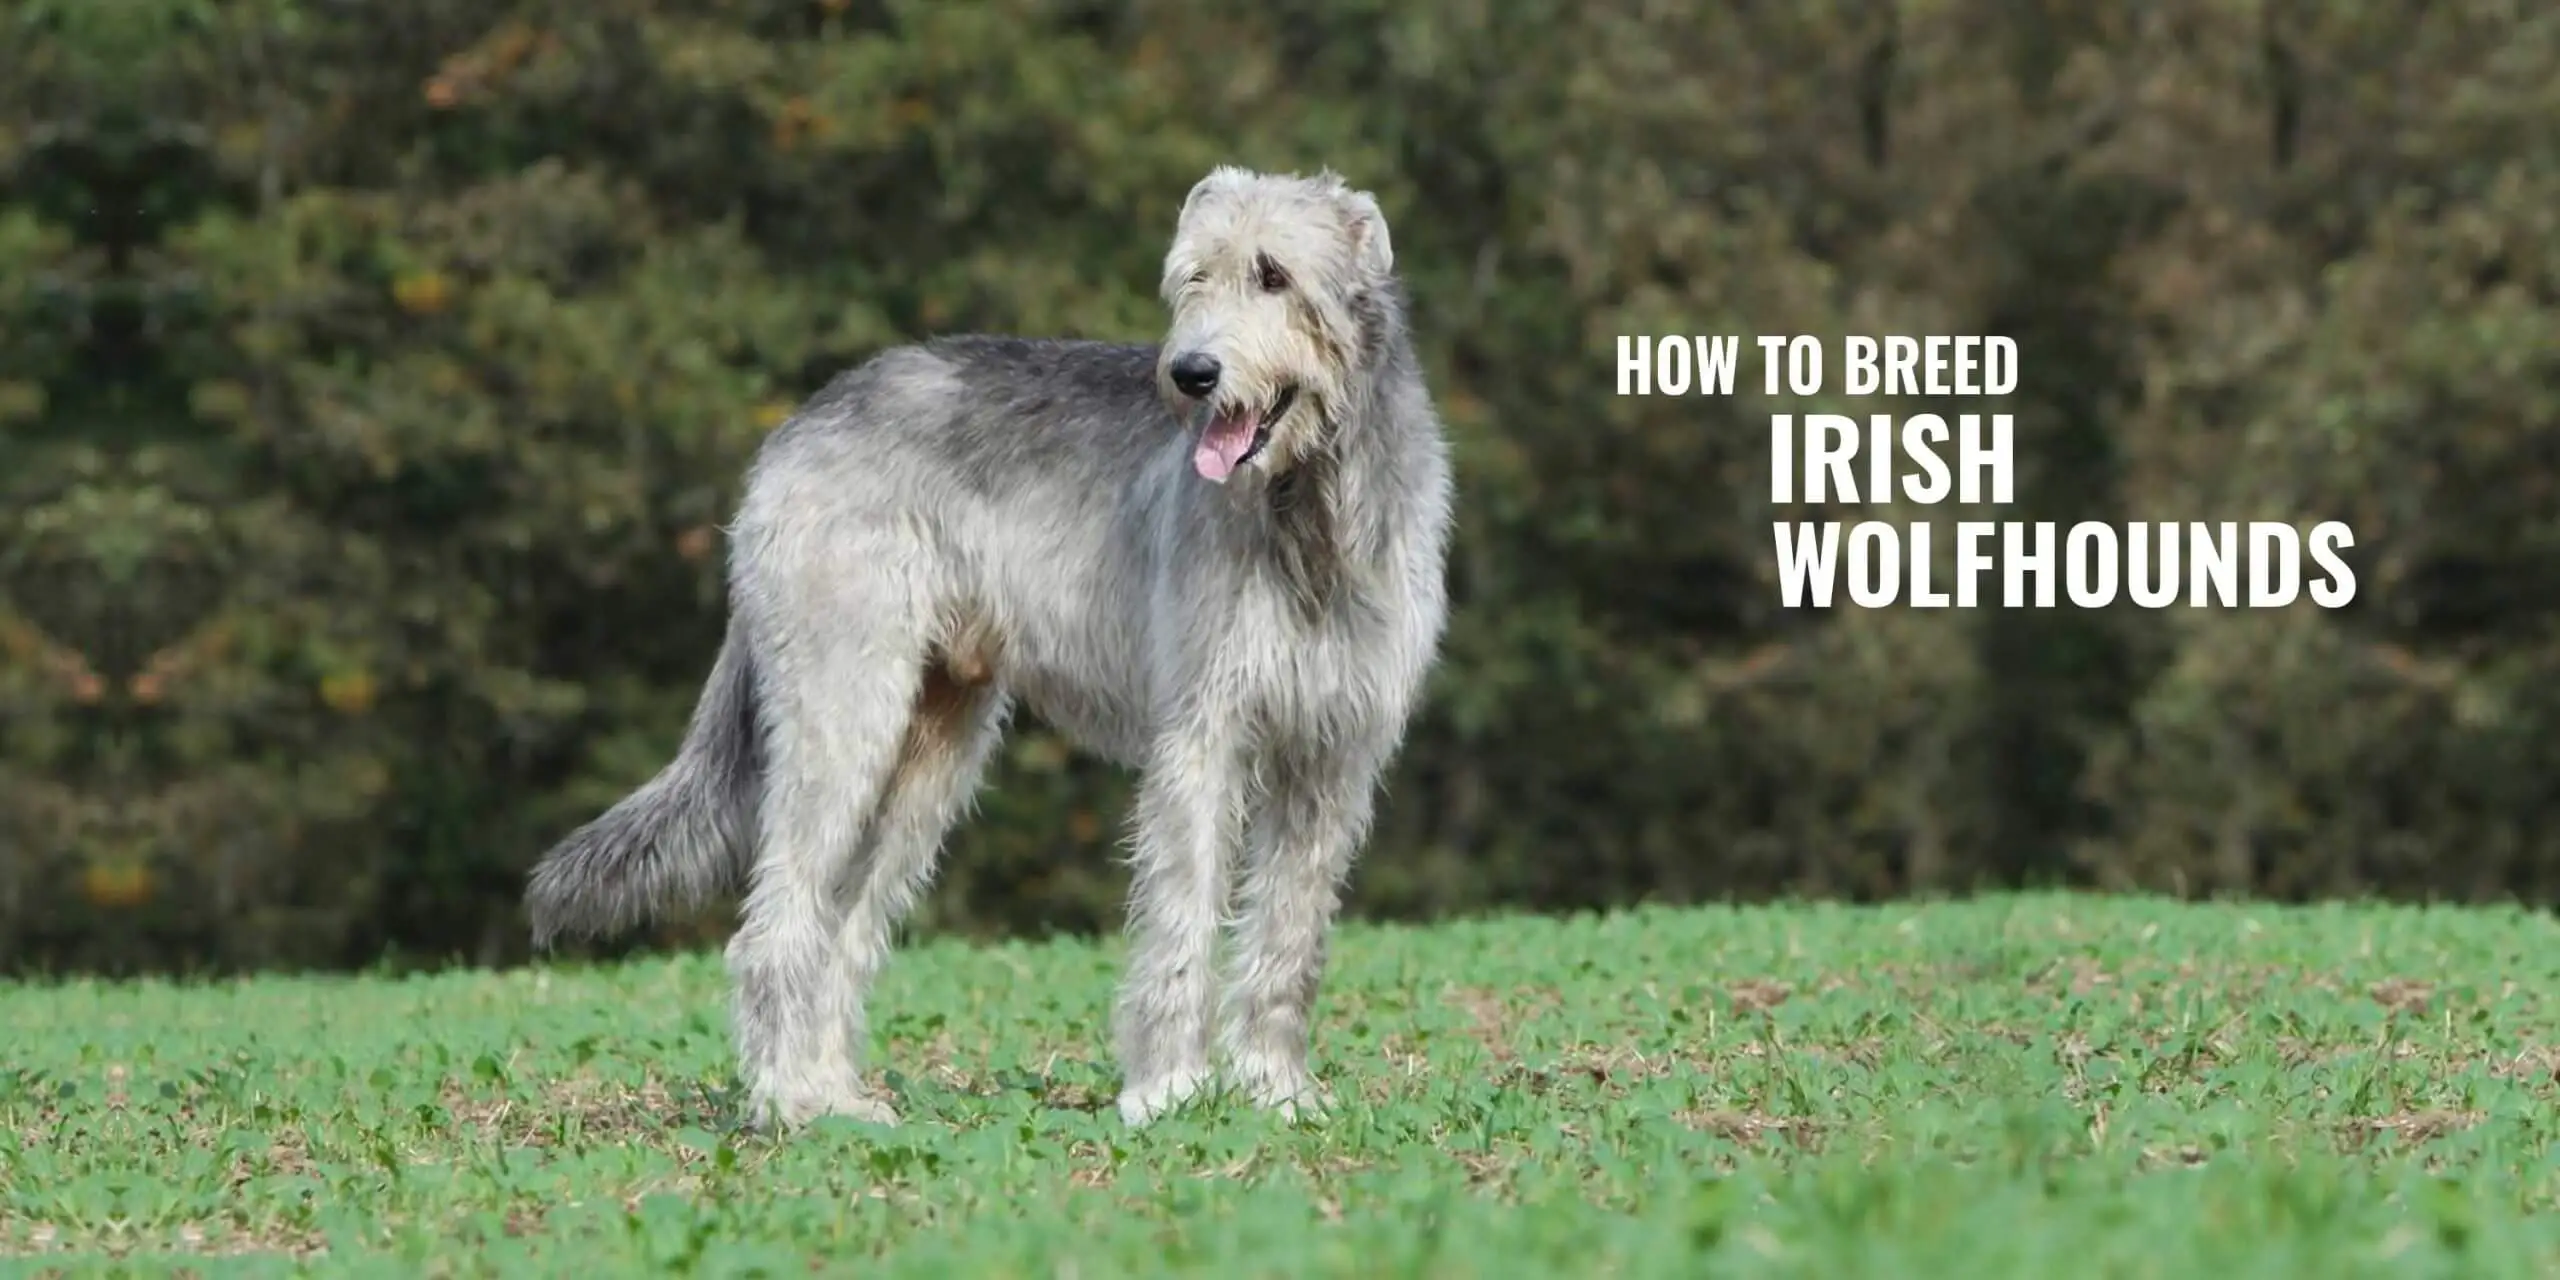 How to take care of irish wolfhound puppies after their birth?